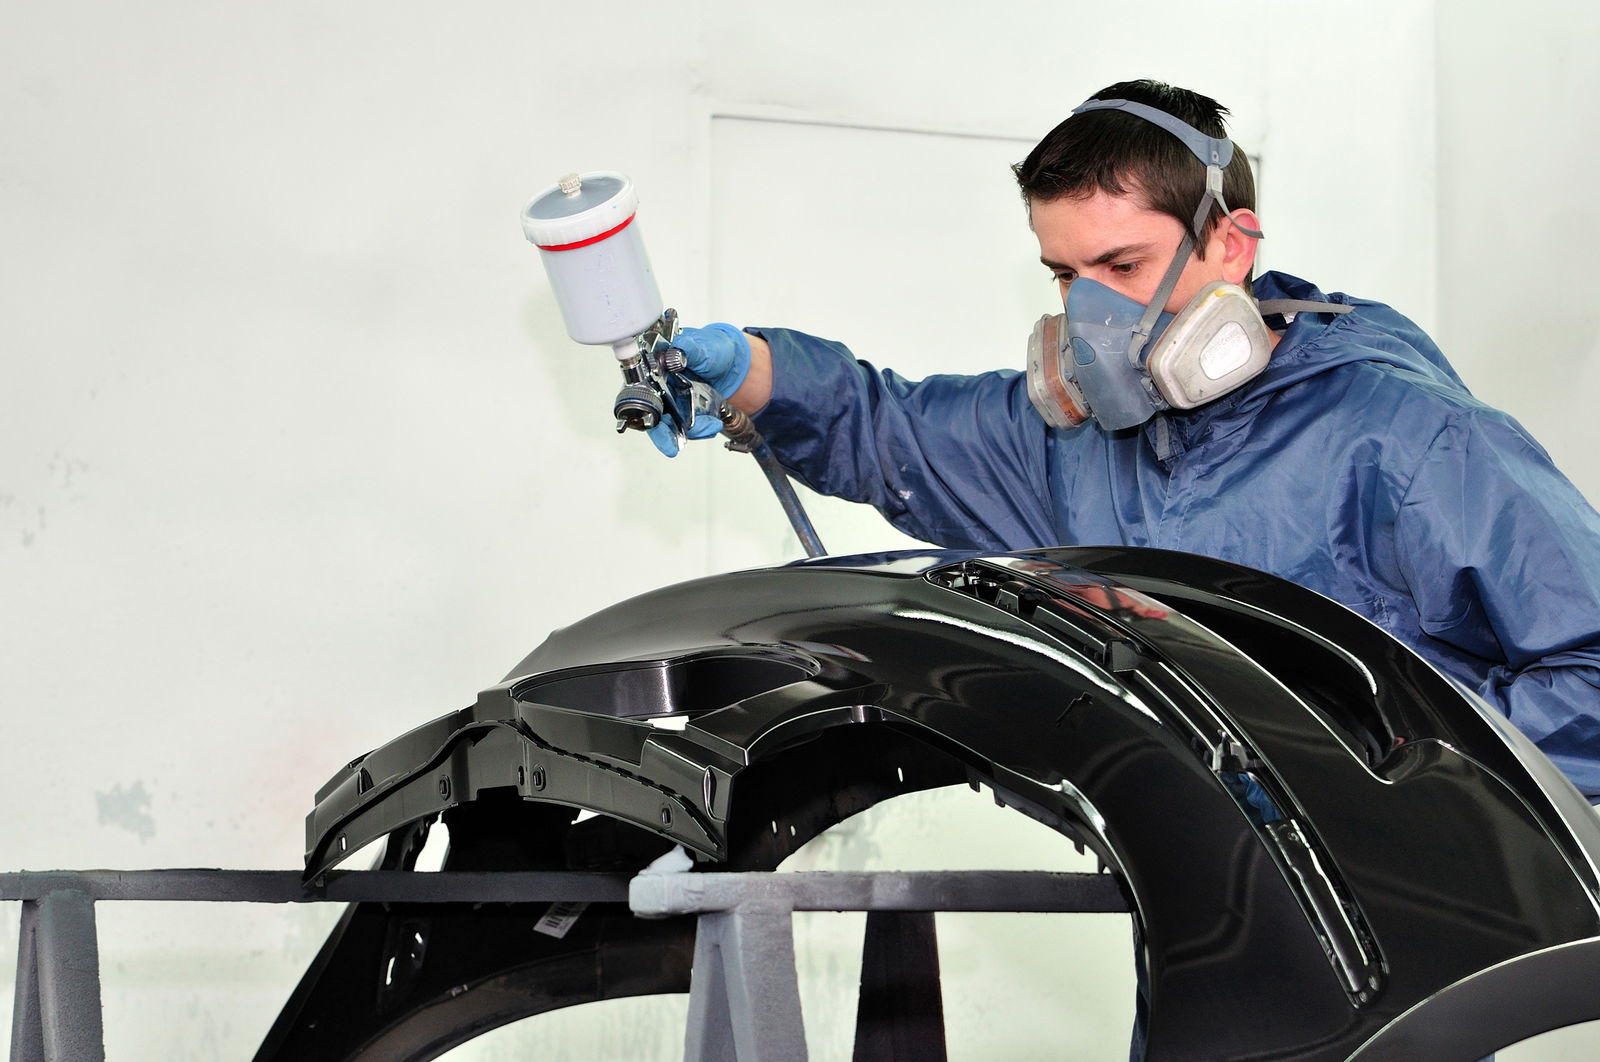 Does car insurance pay for paint jobs?